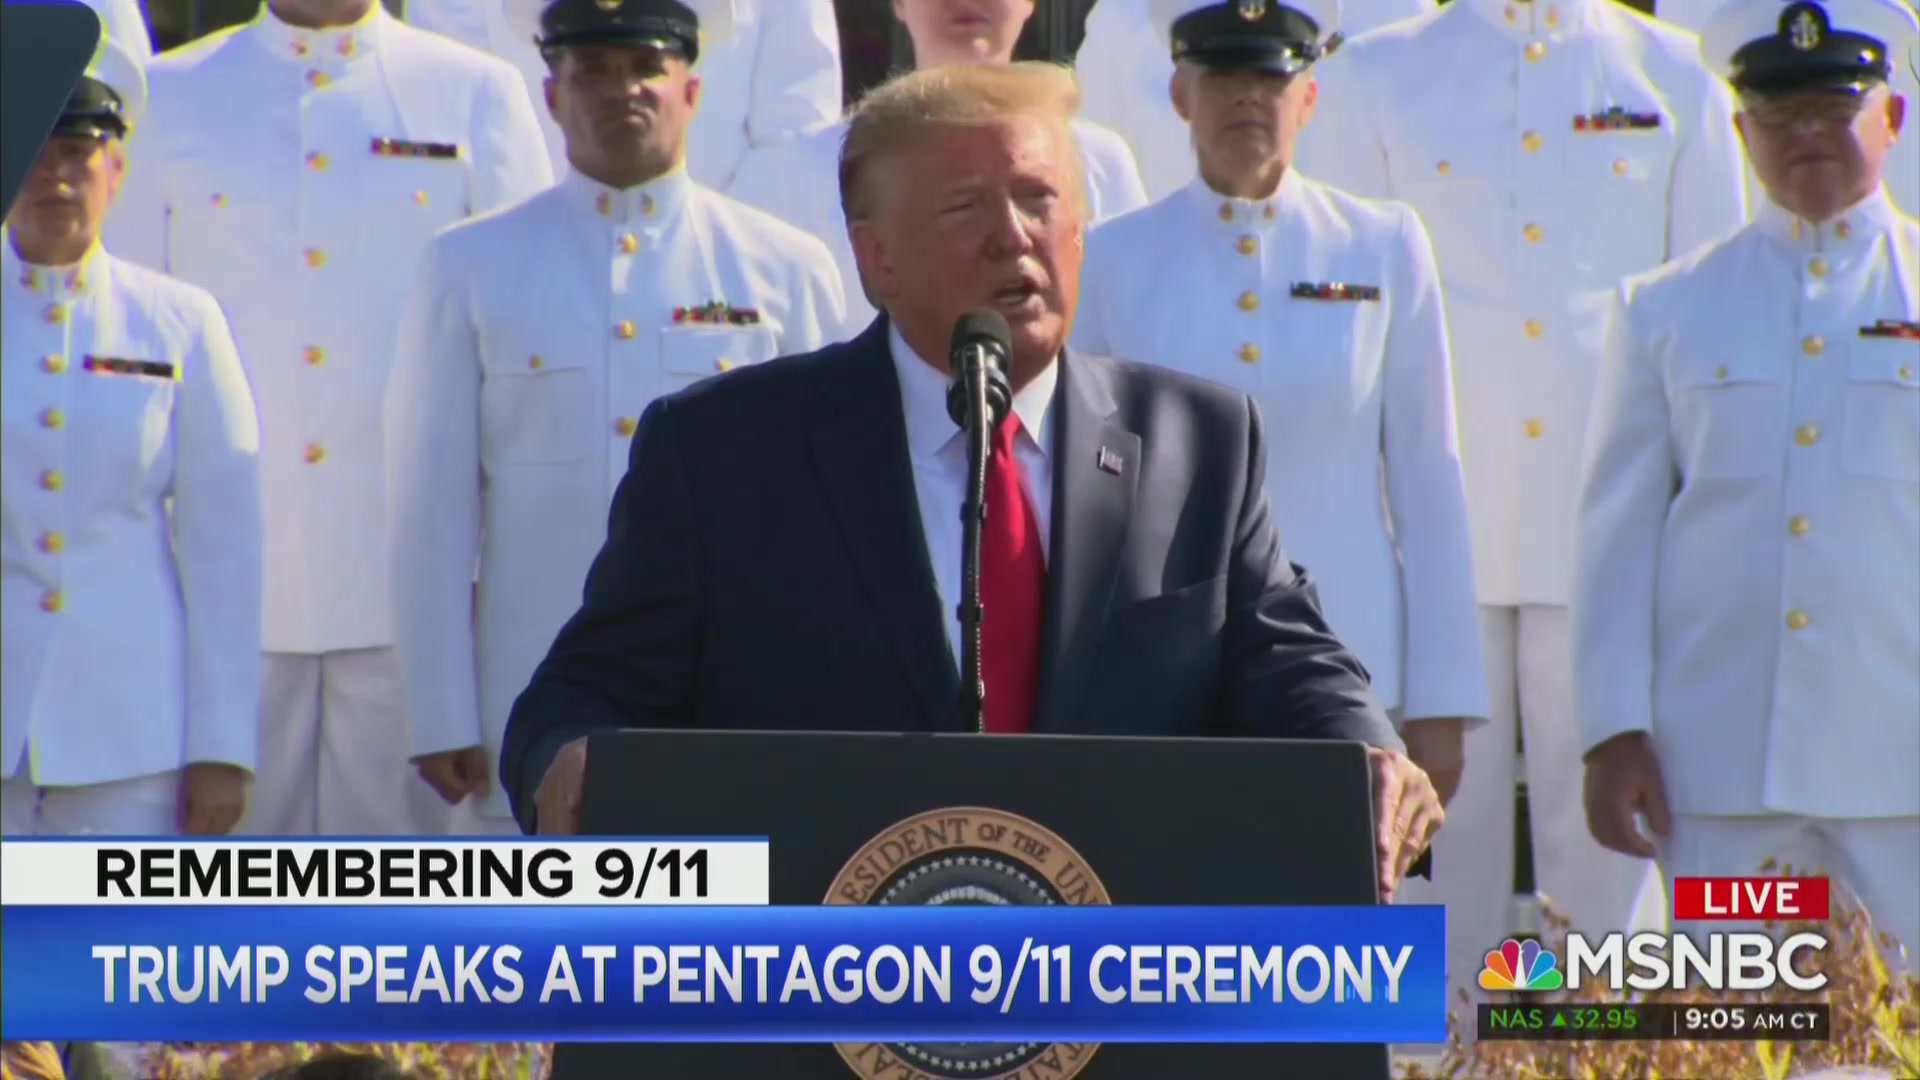 During 9/11 Ceremony, Trump Repeats Baseless Claim He Helped Out at Ground Zero